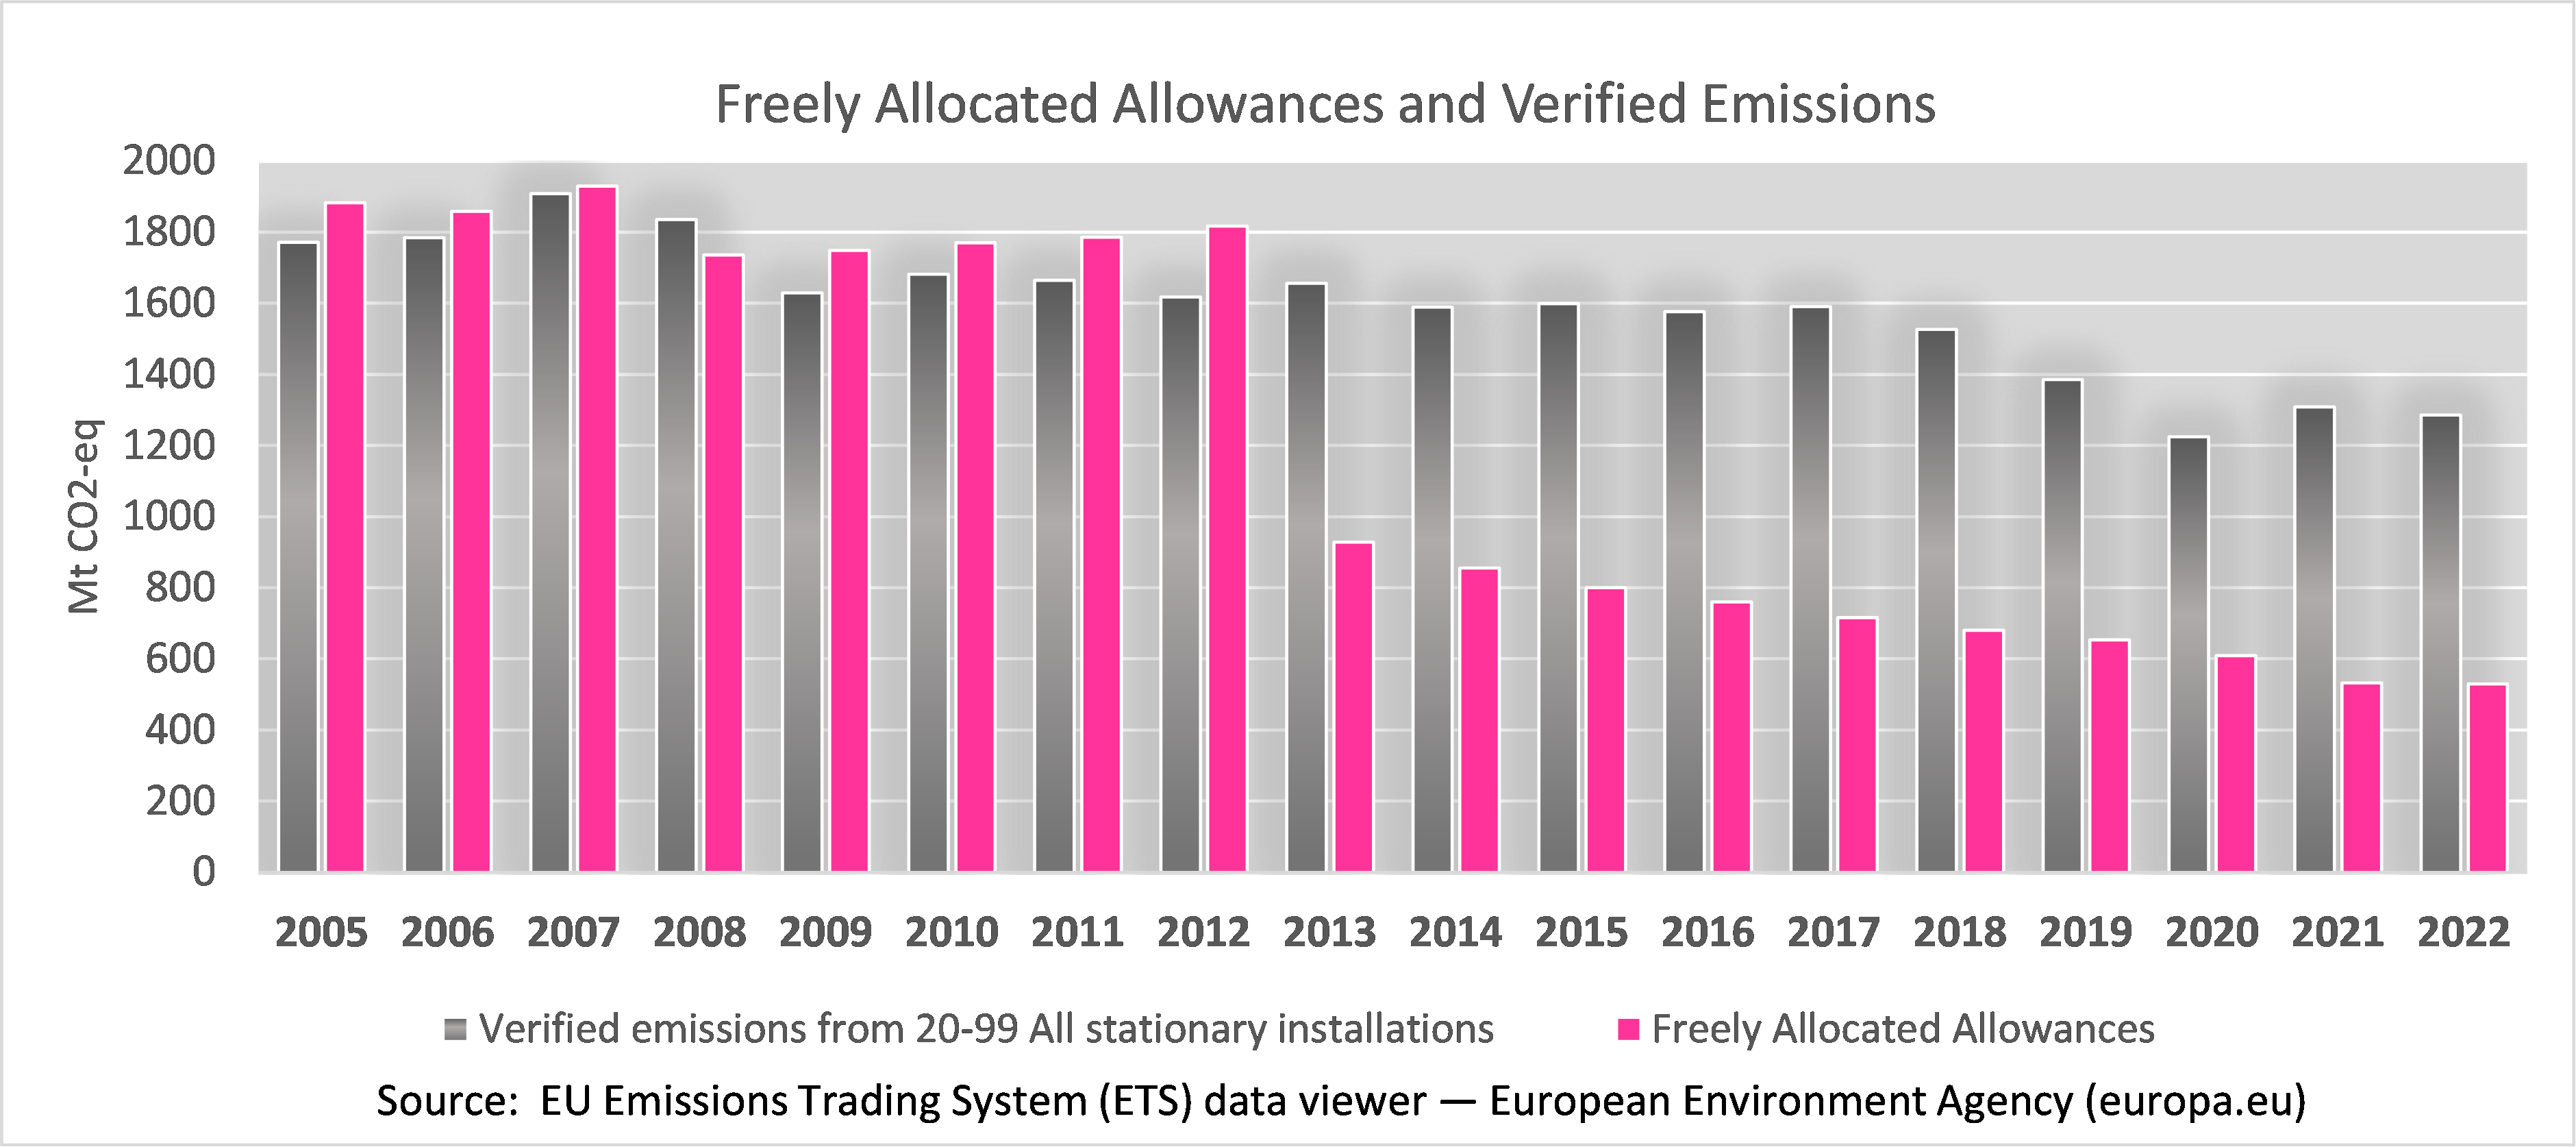 Free allowances given out by EU ETS more than emissions